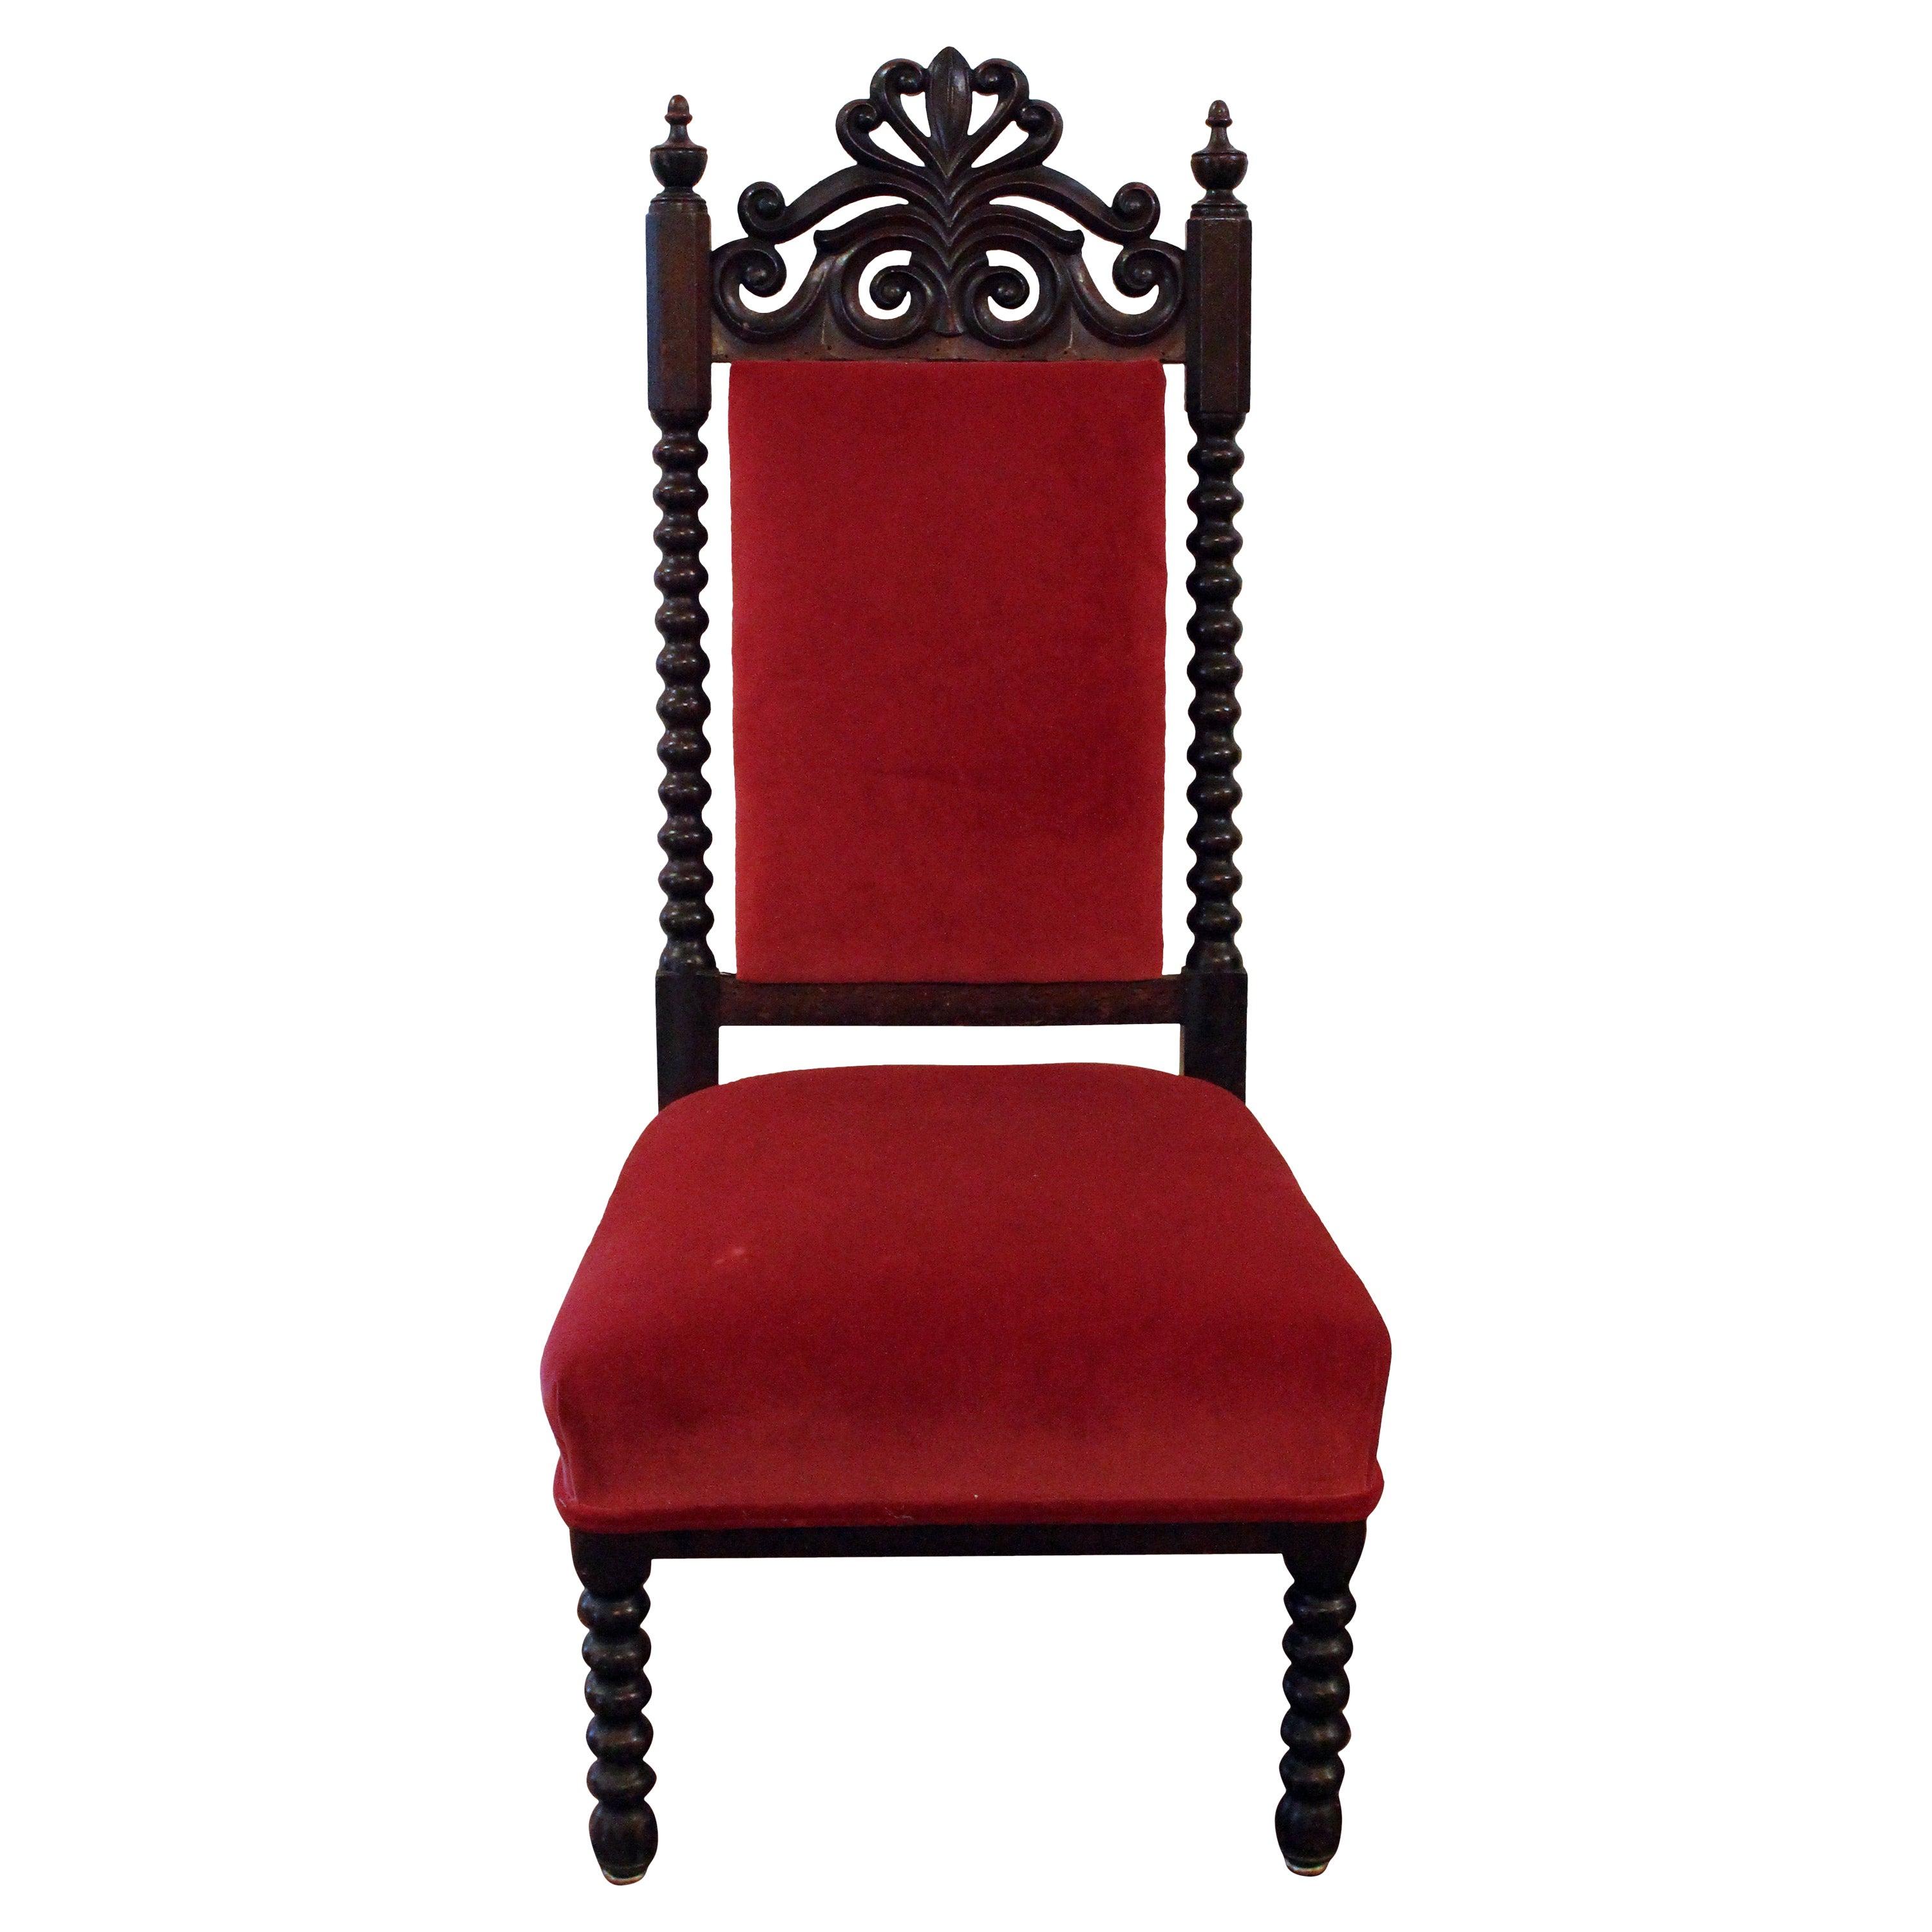 3rd Quarter 19th Century English Child's Parlor Chair For Sale